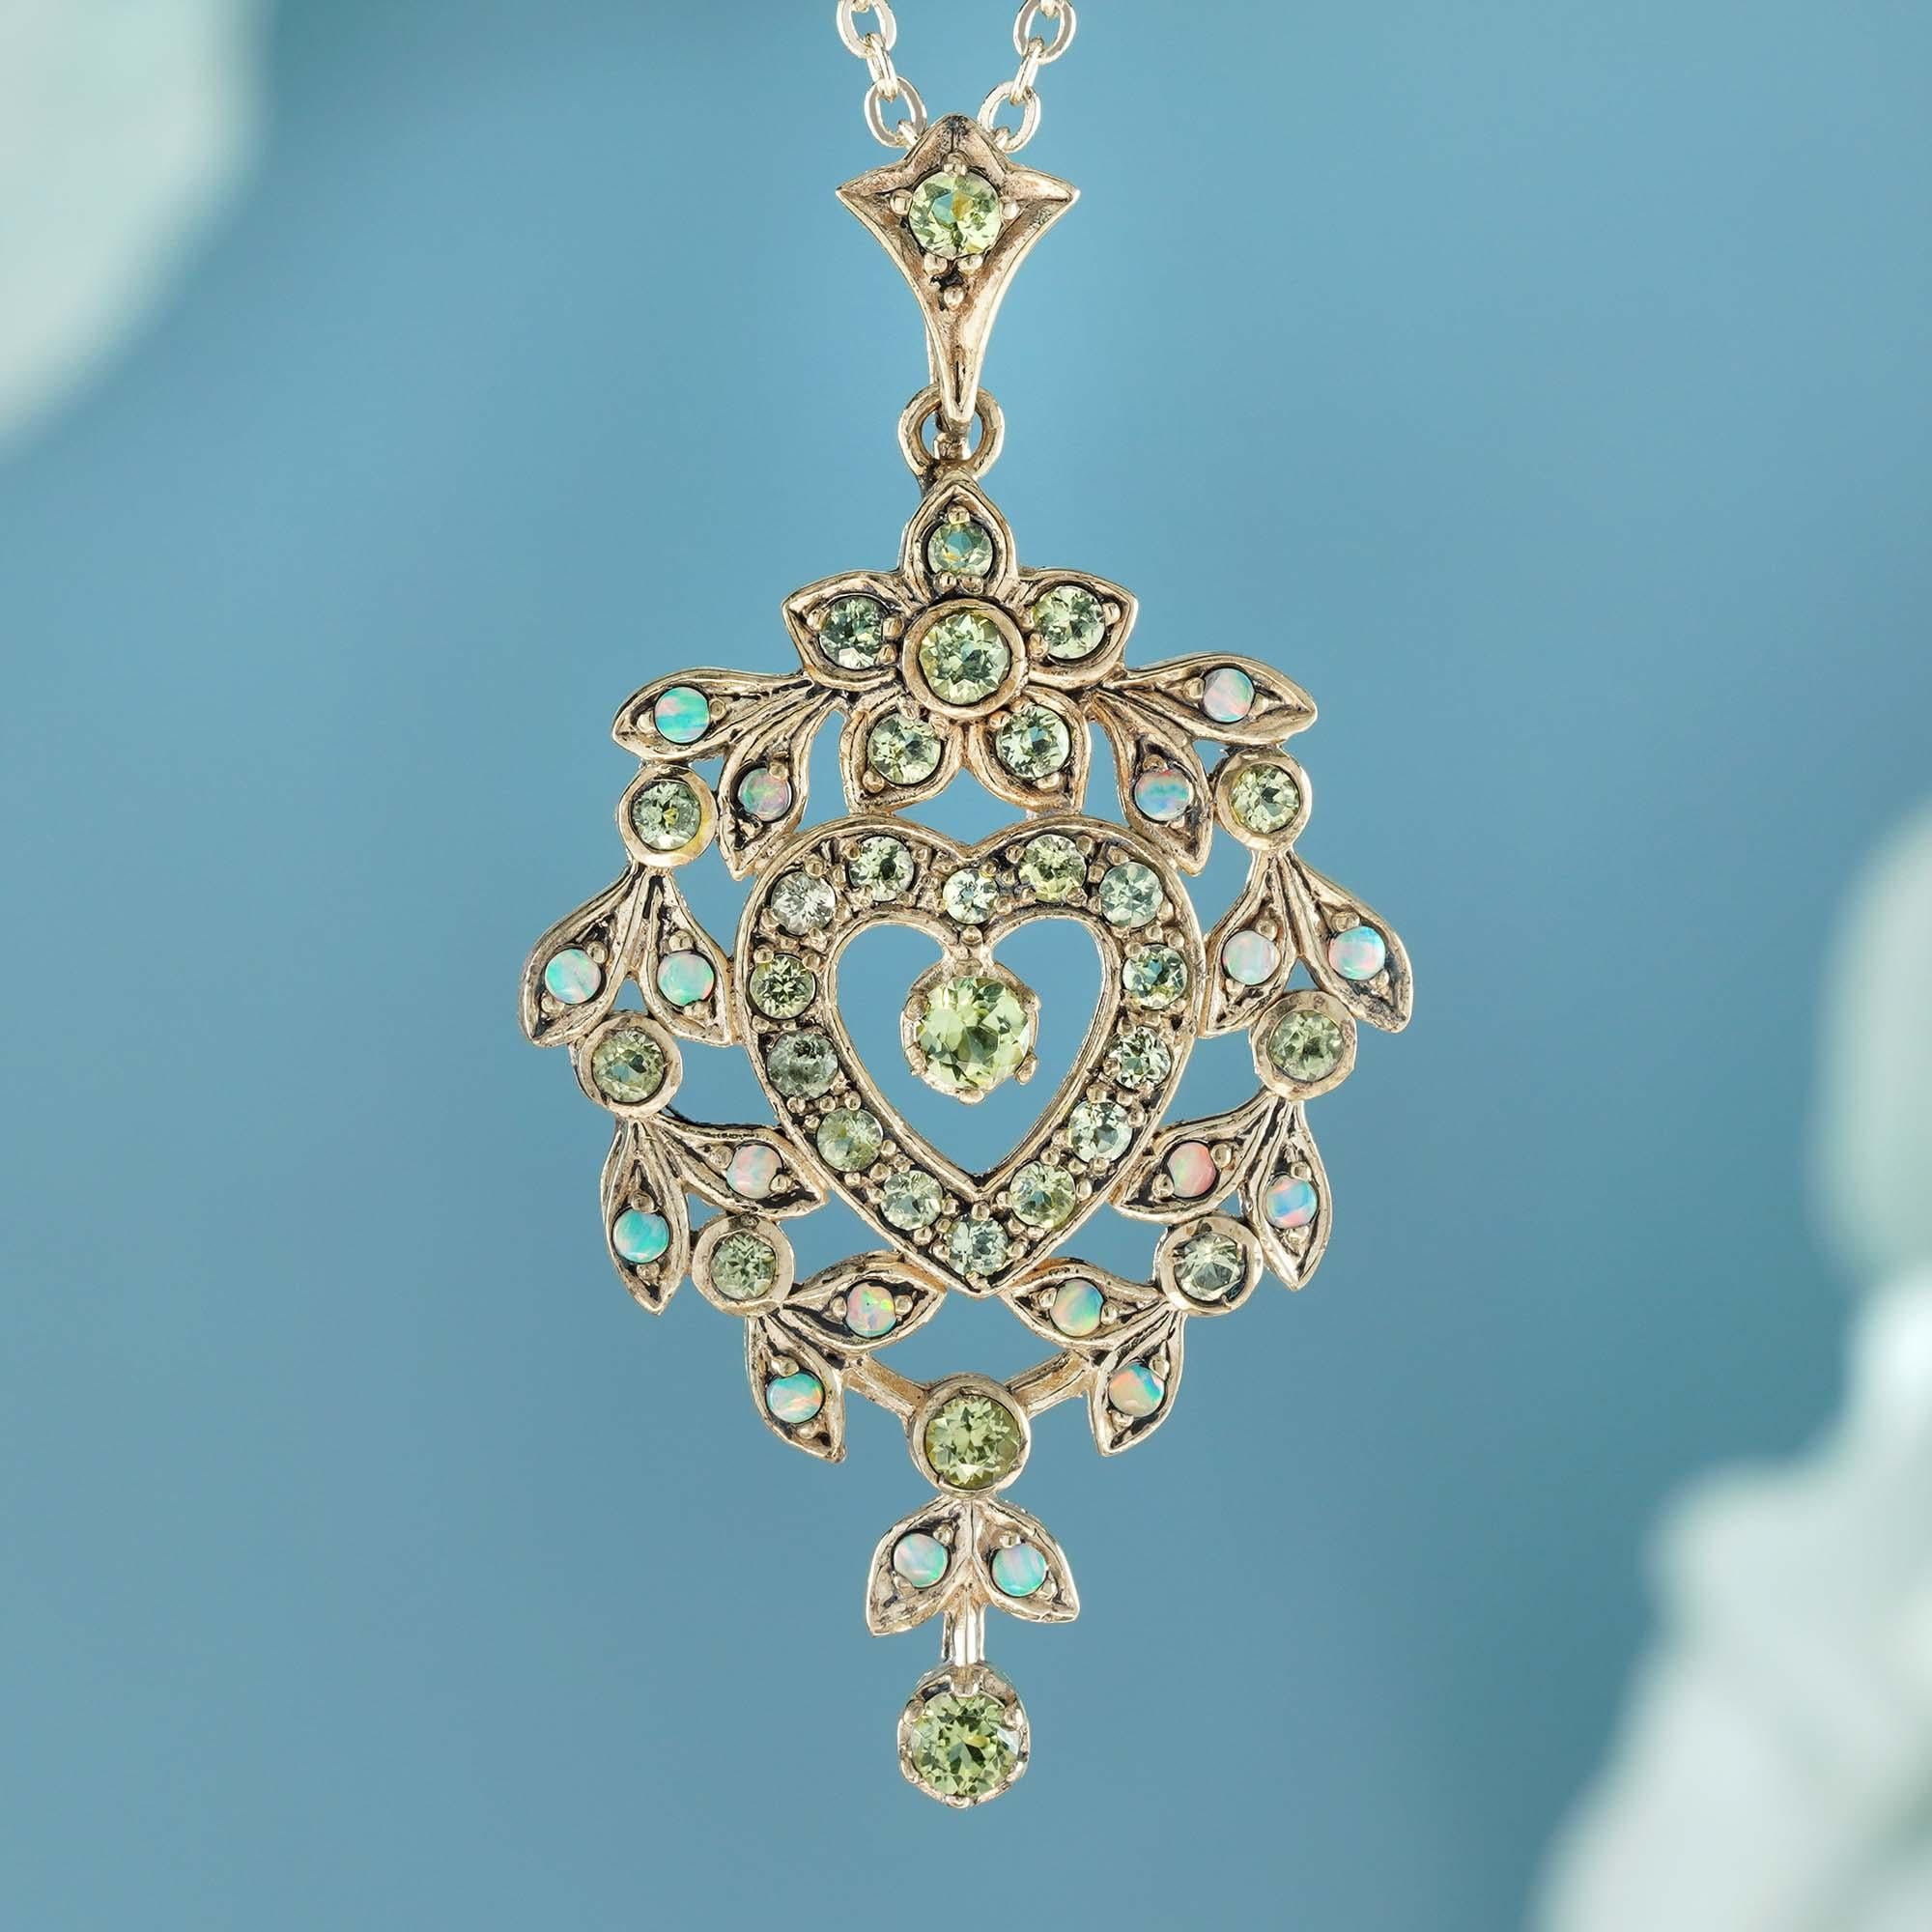 The Victorian-style heart-shaped pendant with a floral motif. It’s set in solid yellow gold shines brightly features natural peridot and opal gemstones. The peridots are in the flowered and the heart frames at the center of the pendant, and they’re